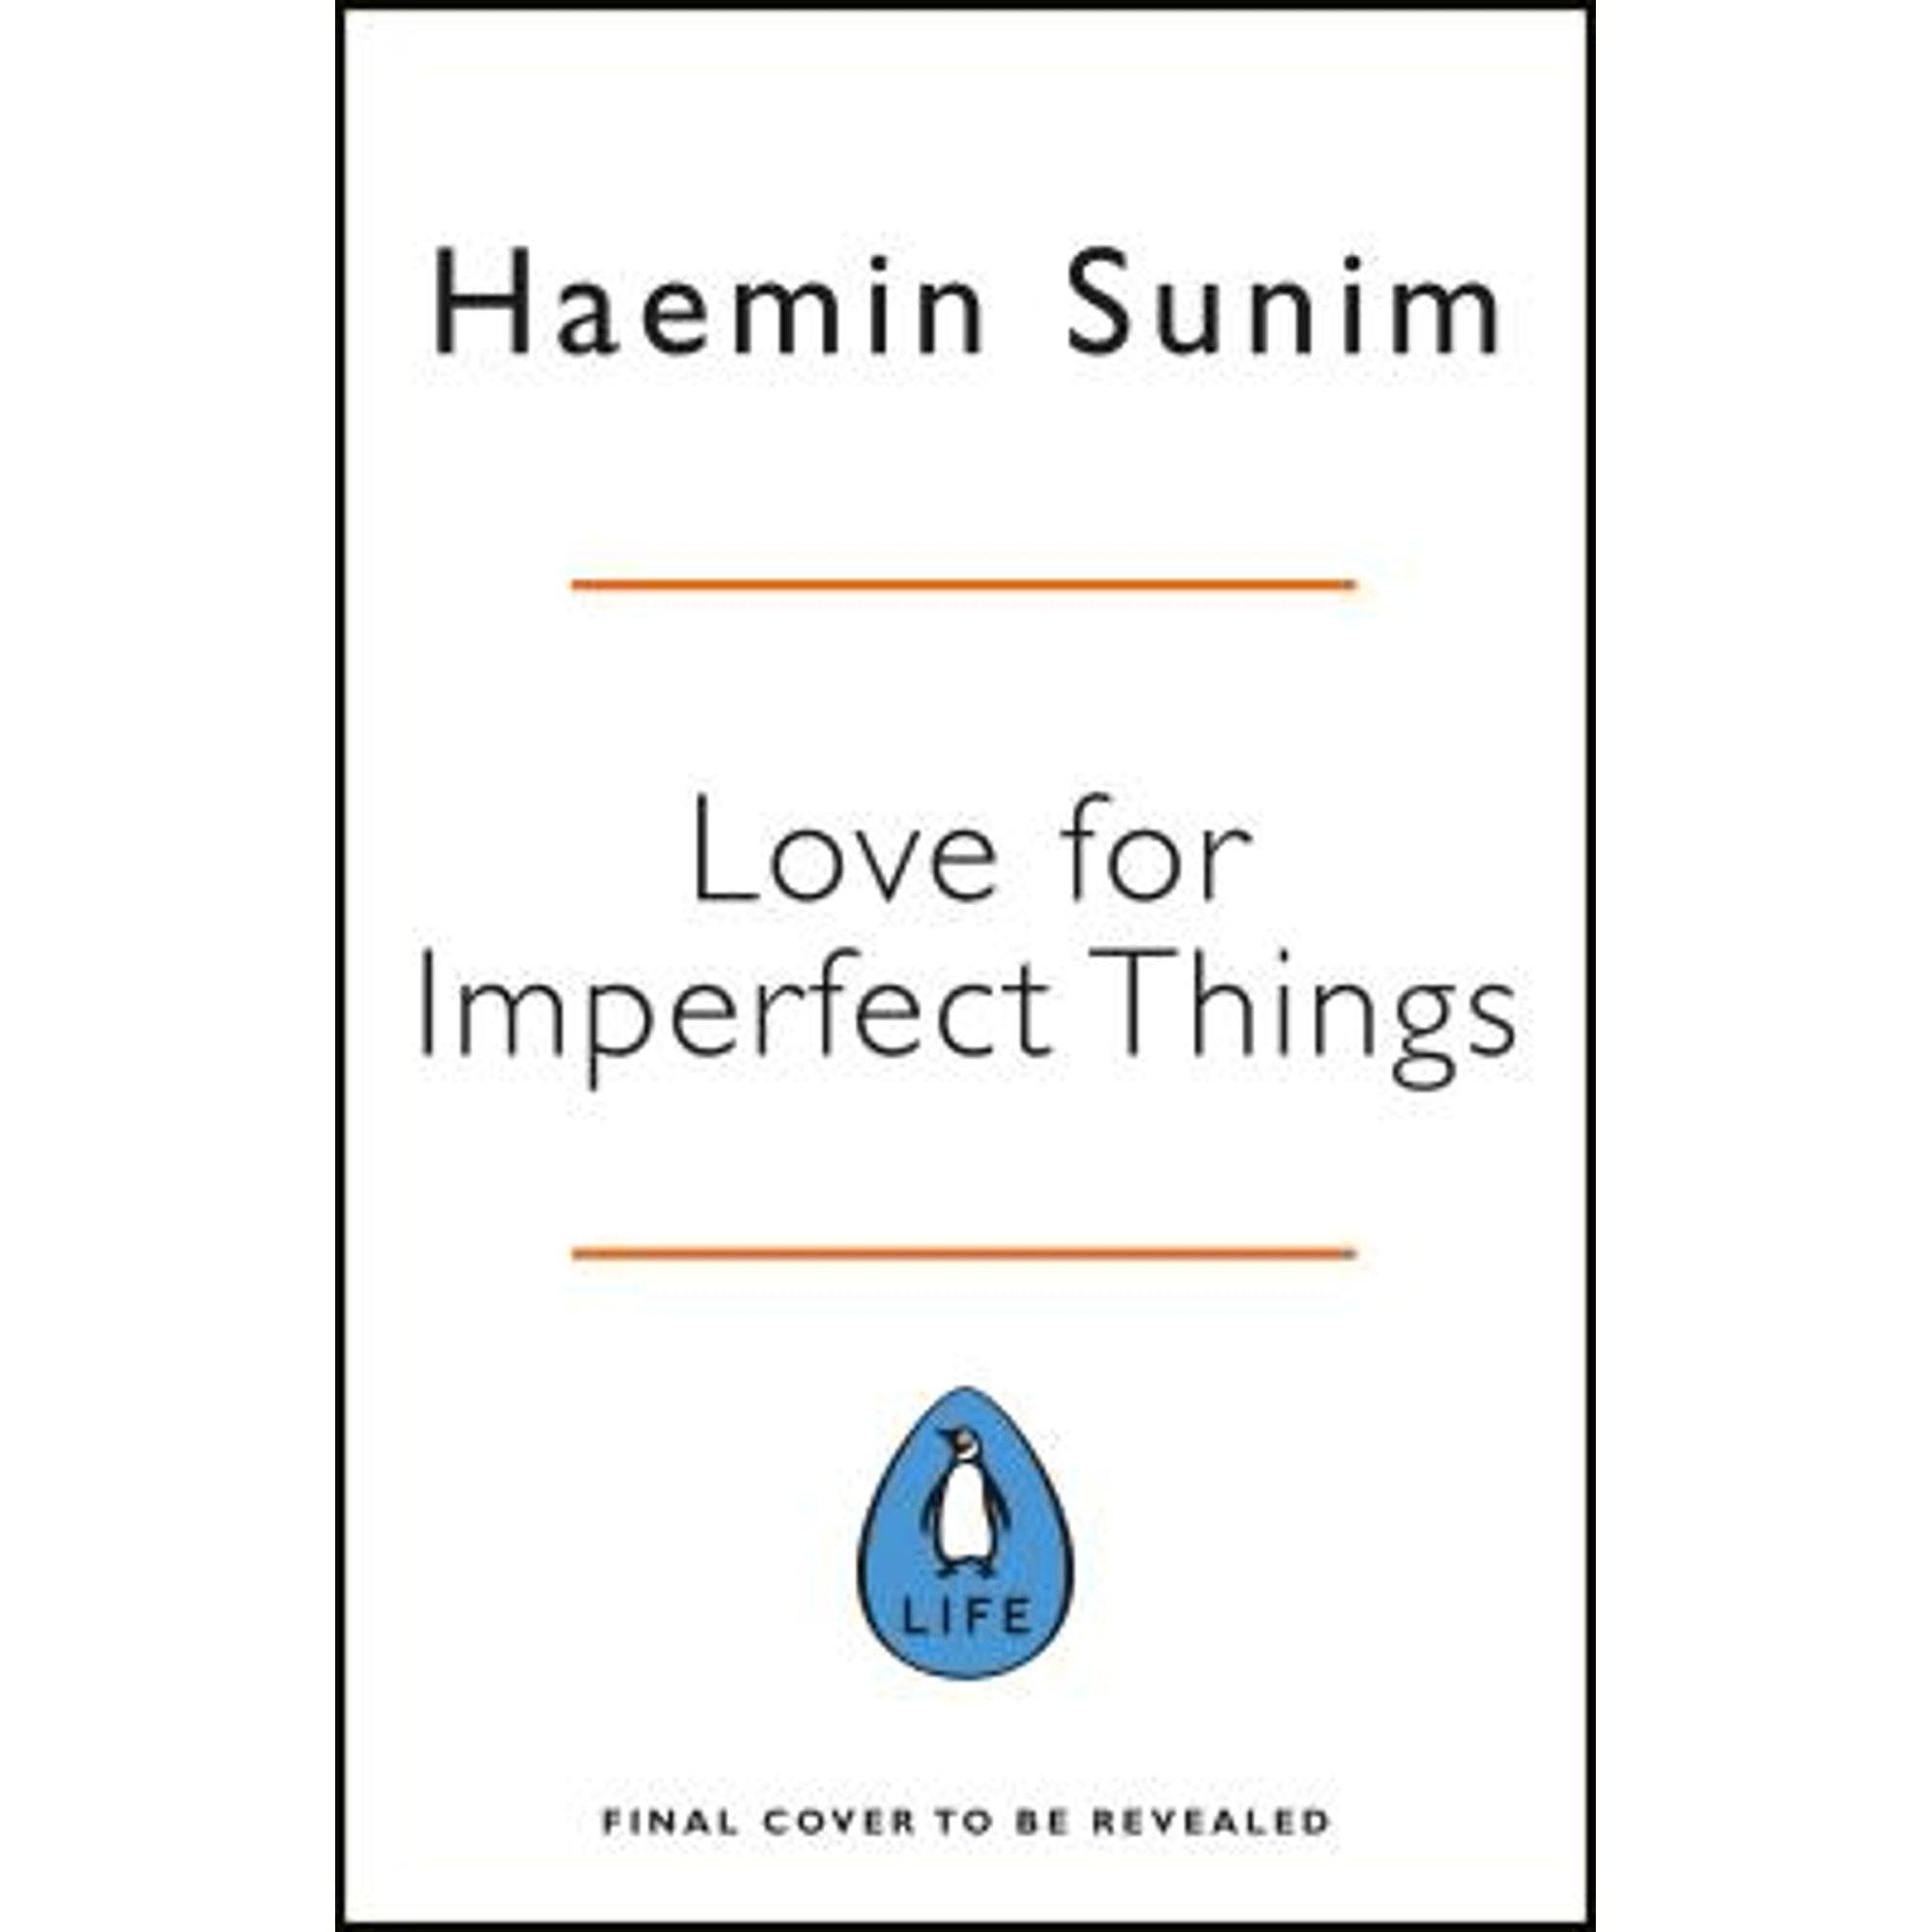 Pre-Owned Love for Imperfect Things: How to Accept Yourself in a World Striving for Perfection (Hardcover) by Haemin Sunim